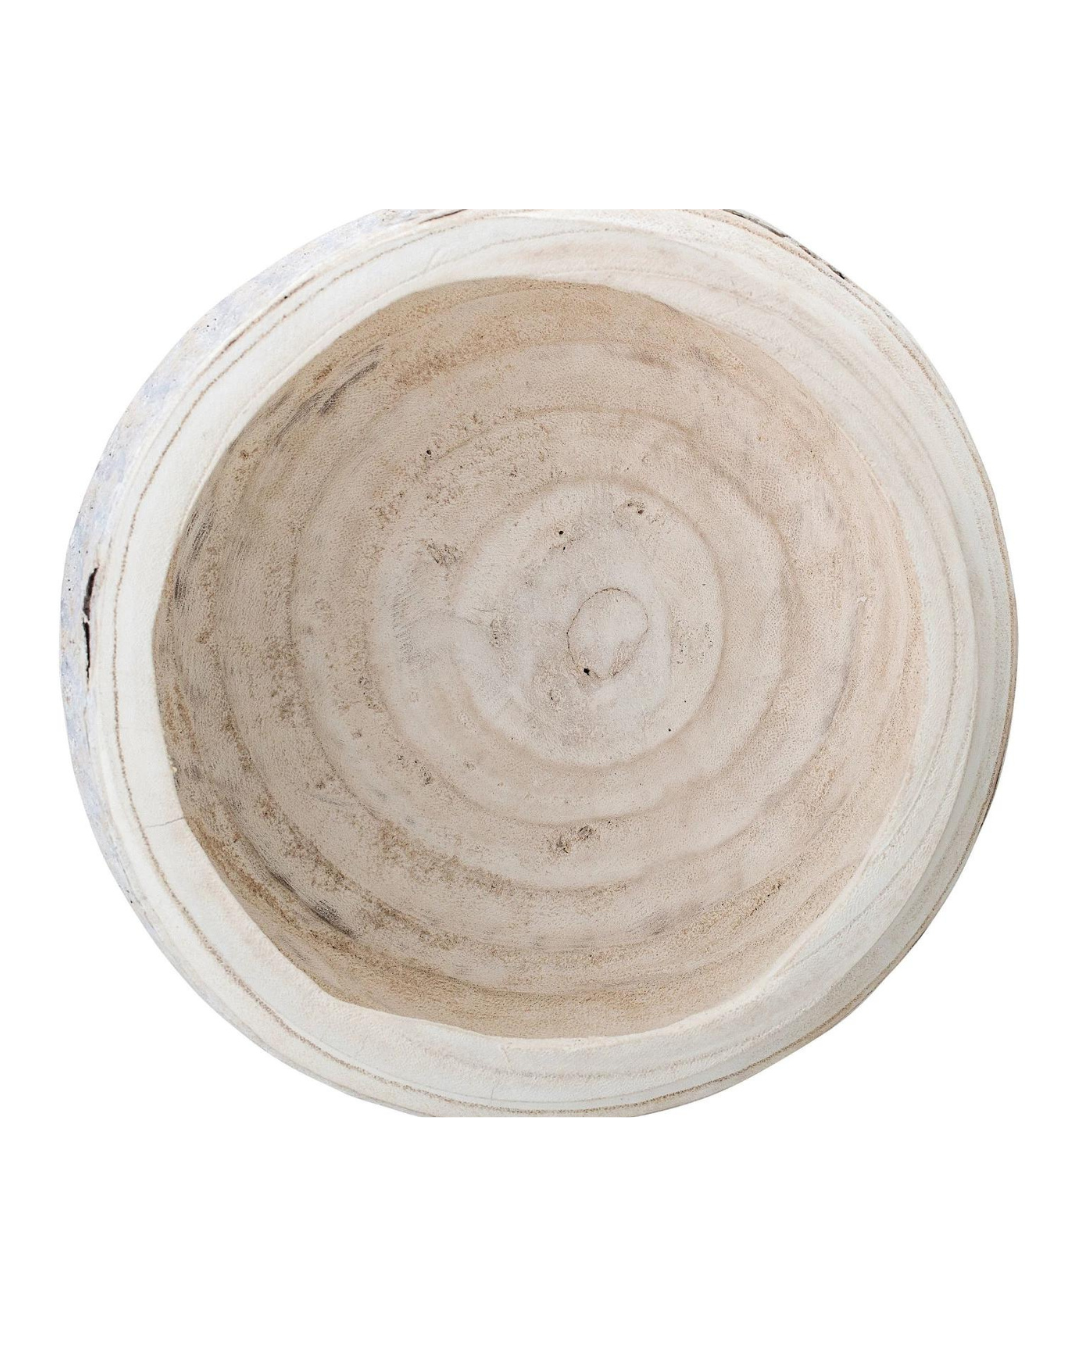 Top view of a Bloomingville Paulownia Wood bowl with natural rings and a white painted border, sourced from Scottsdale, Arizona. The surface shows visible wood grain and texture.